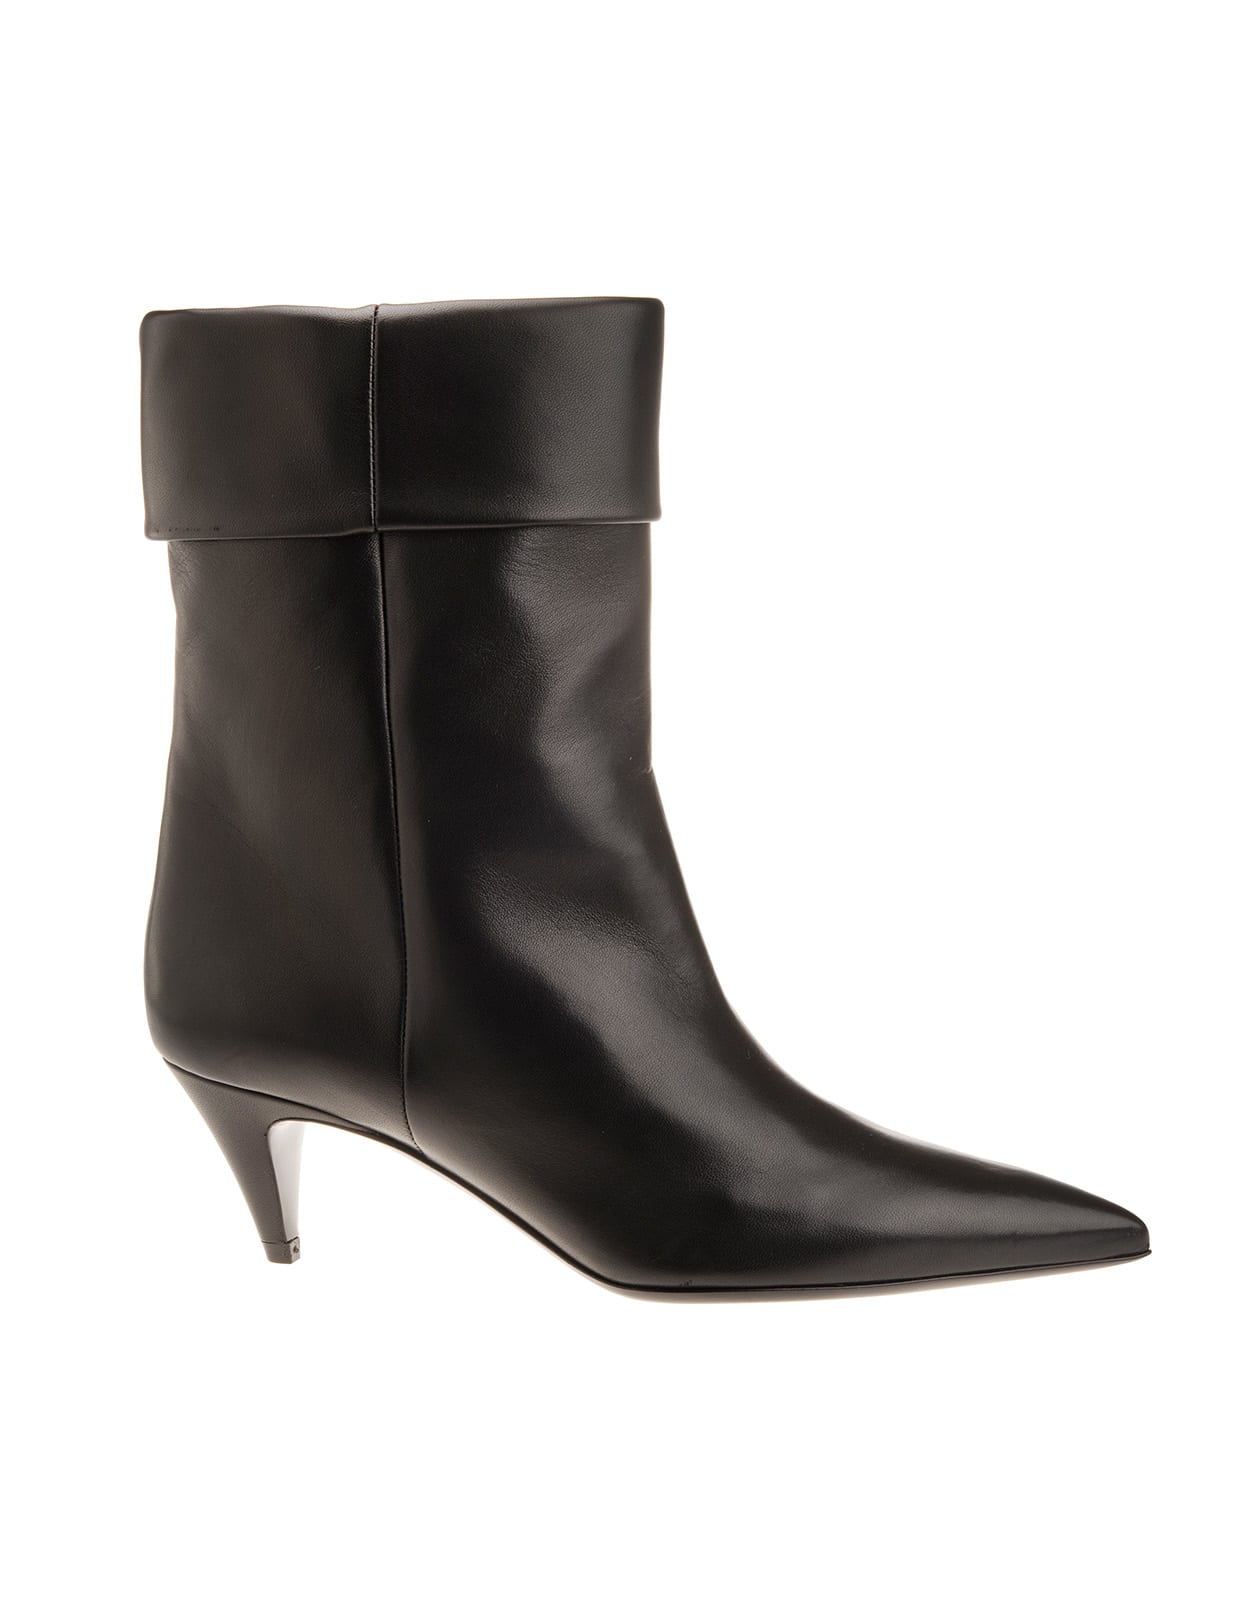 Buy Saint Laurent Ankle Boot With Cuff online, shop Saint Laurent shoes with free shipping